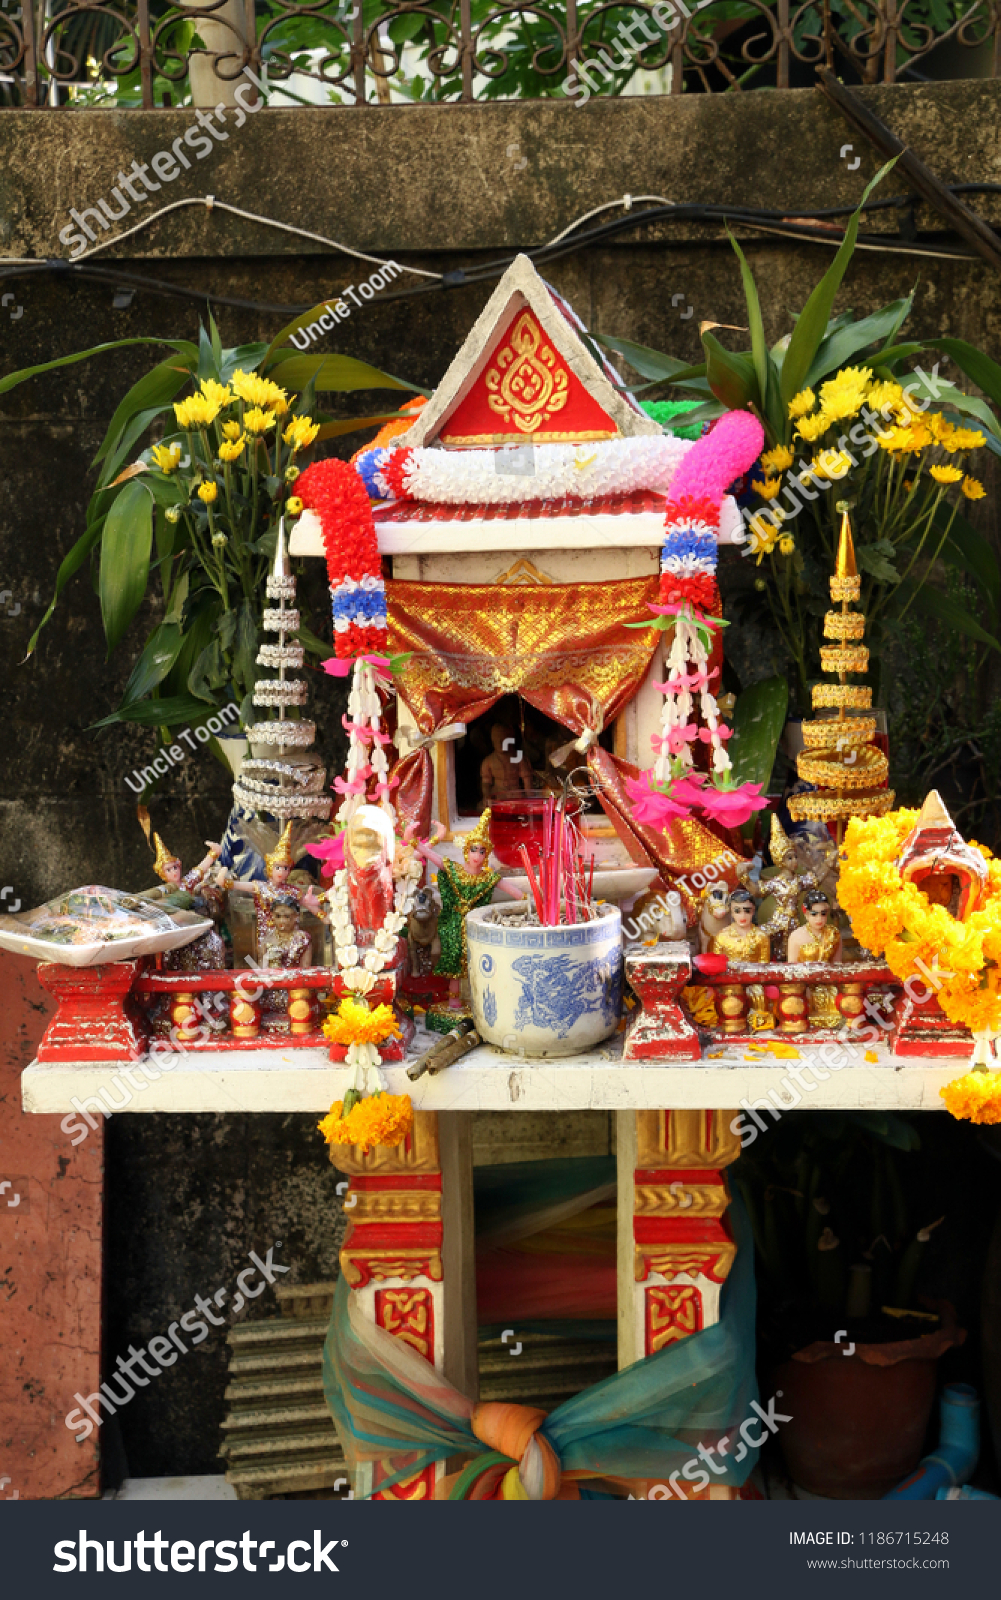 Spirit House - Spirit houses in front of family's resident. This shows that all Thai people may have spirit house as a guardian and bring good luck to the family. #1186715248